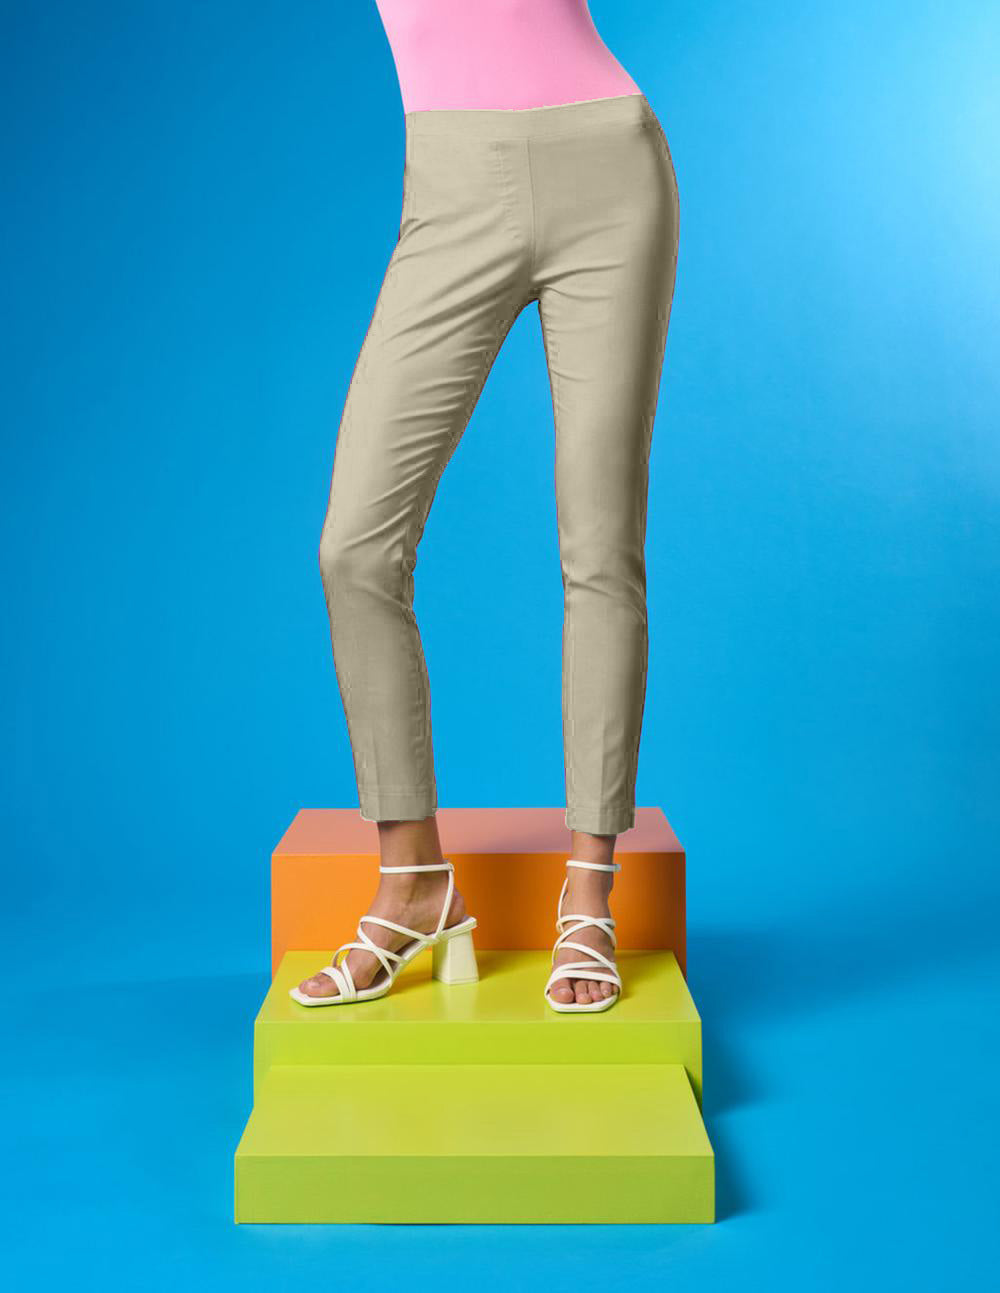 SiSi Joy Leggings - Beige Summer weight stretch chino style ankle grazer trouser leggings (treggings) with side slits on the cuff and faux back pockets with buttons and faux front pockets with diamanté studs.